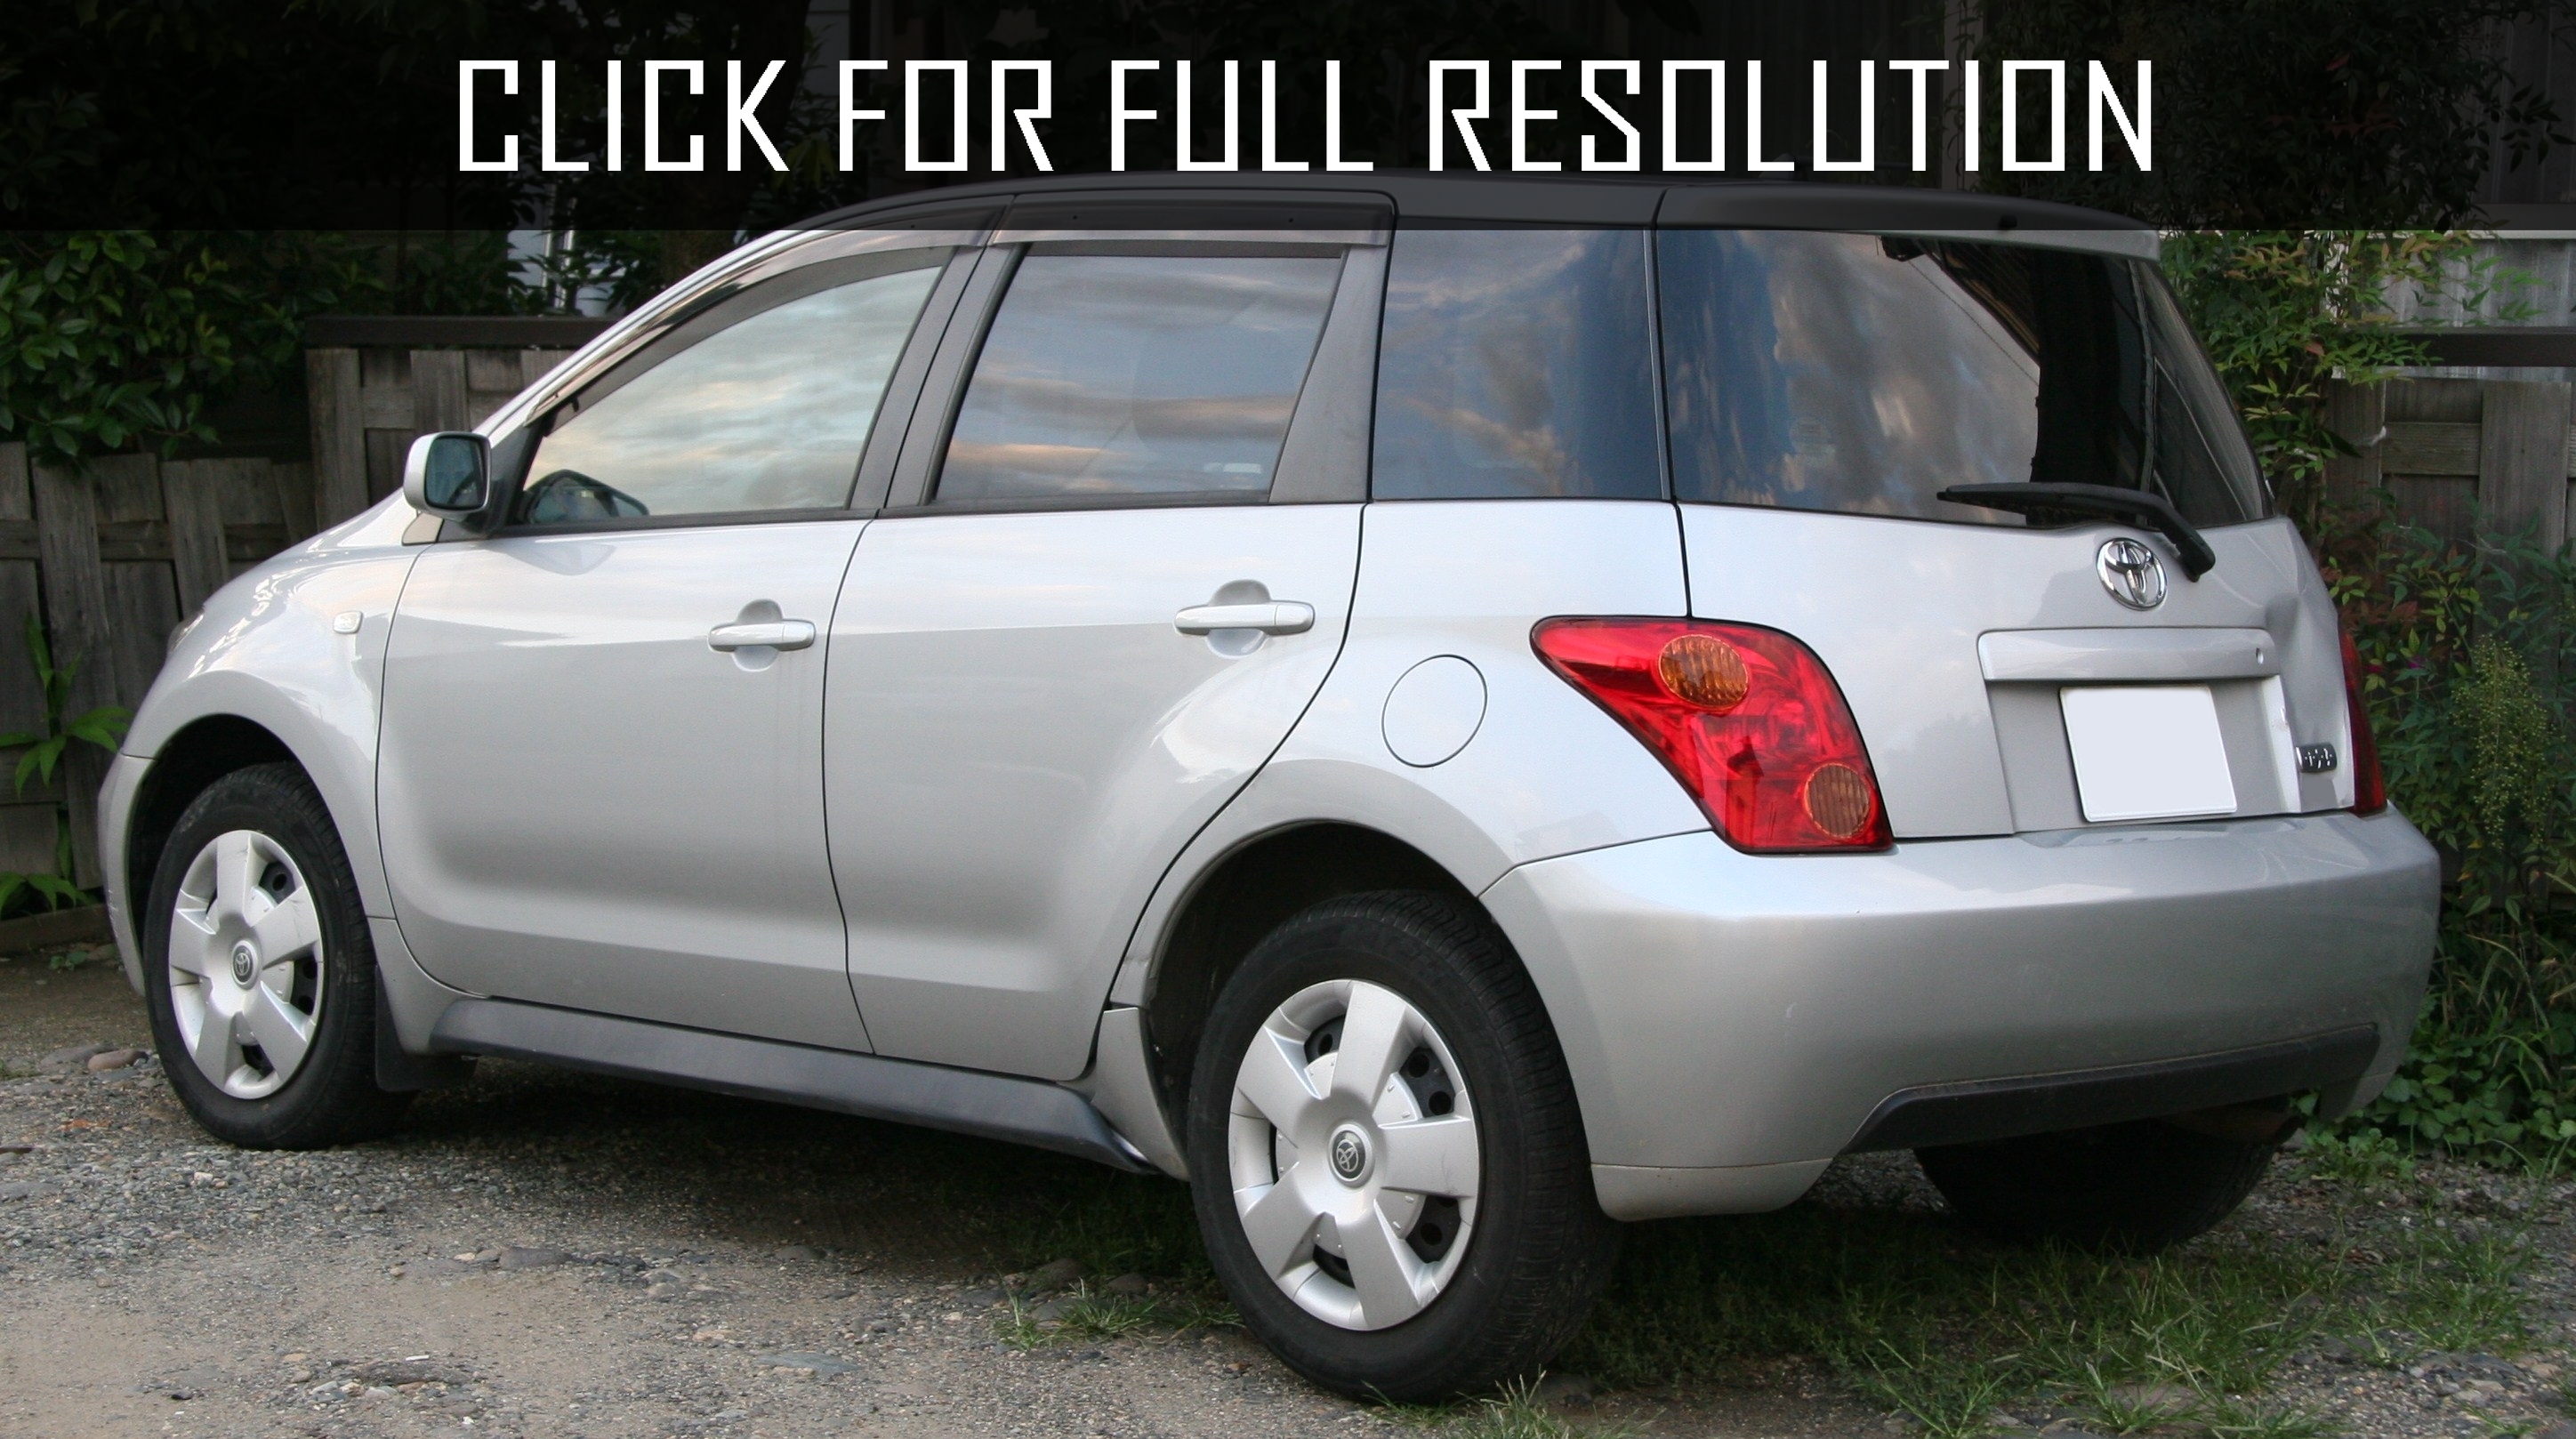 Toyota Ist 2004 Reviews Prices Ratings With Various Photos